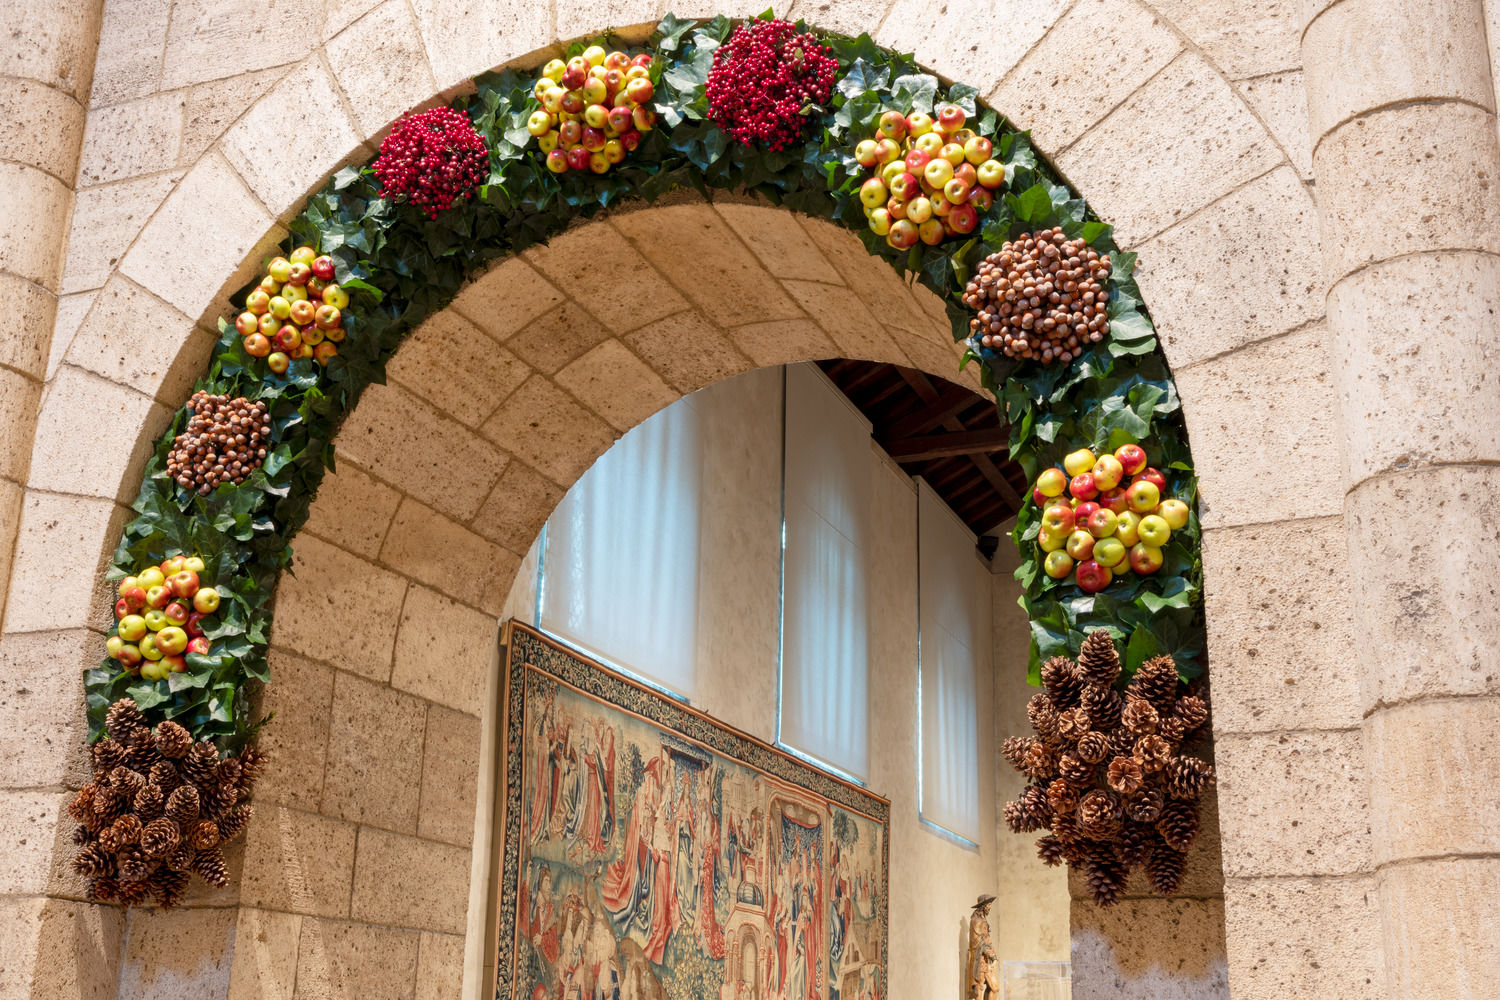 A festive wreath of holly and apples adorns a medieval arch at The Met Cloisters.